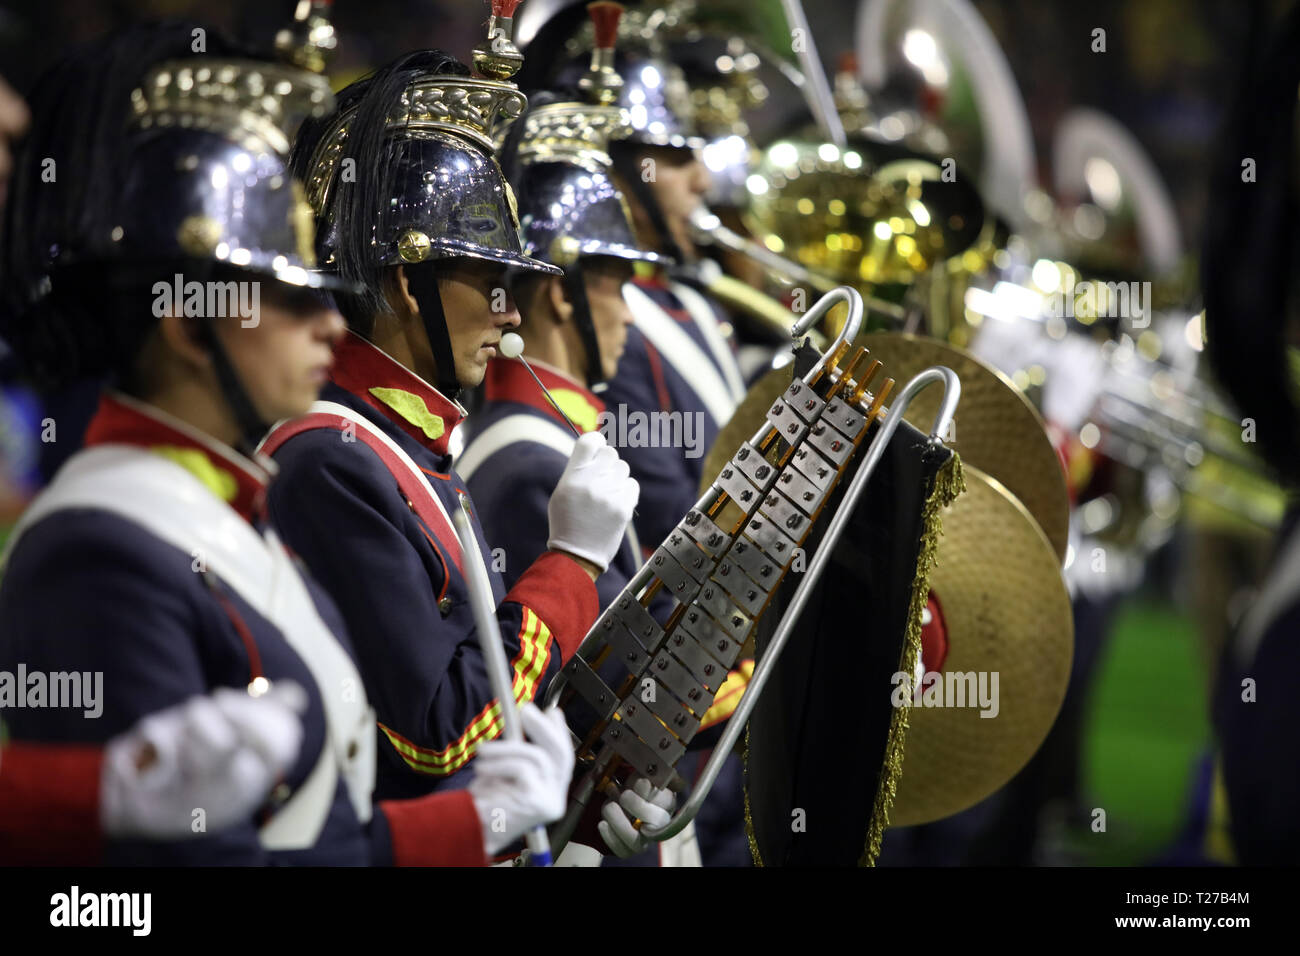 Buenos Aires, Argentina - March 30, 2019: Argentine Army music band playing before a soccer match starts in memory of the Malvinas War fallen in Buenos Aires, Argentina Stock Photo